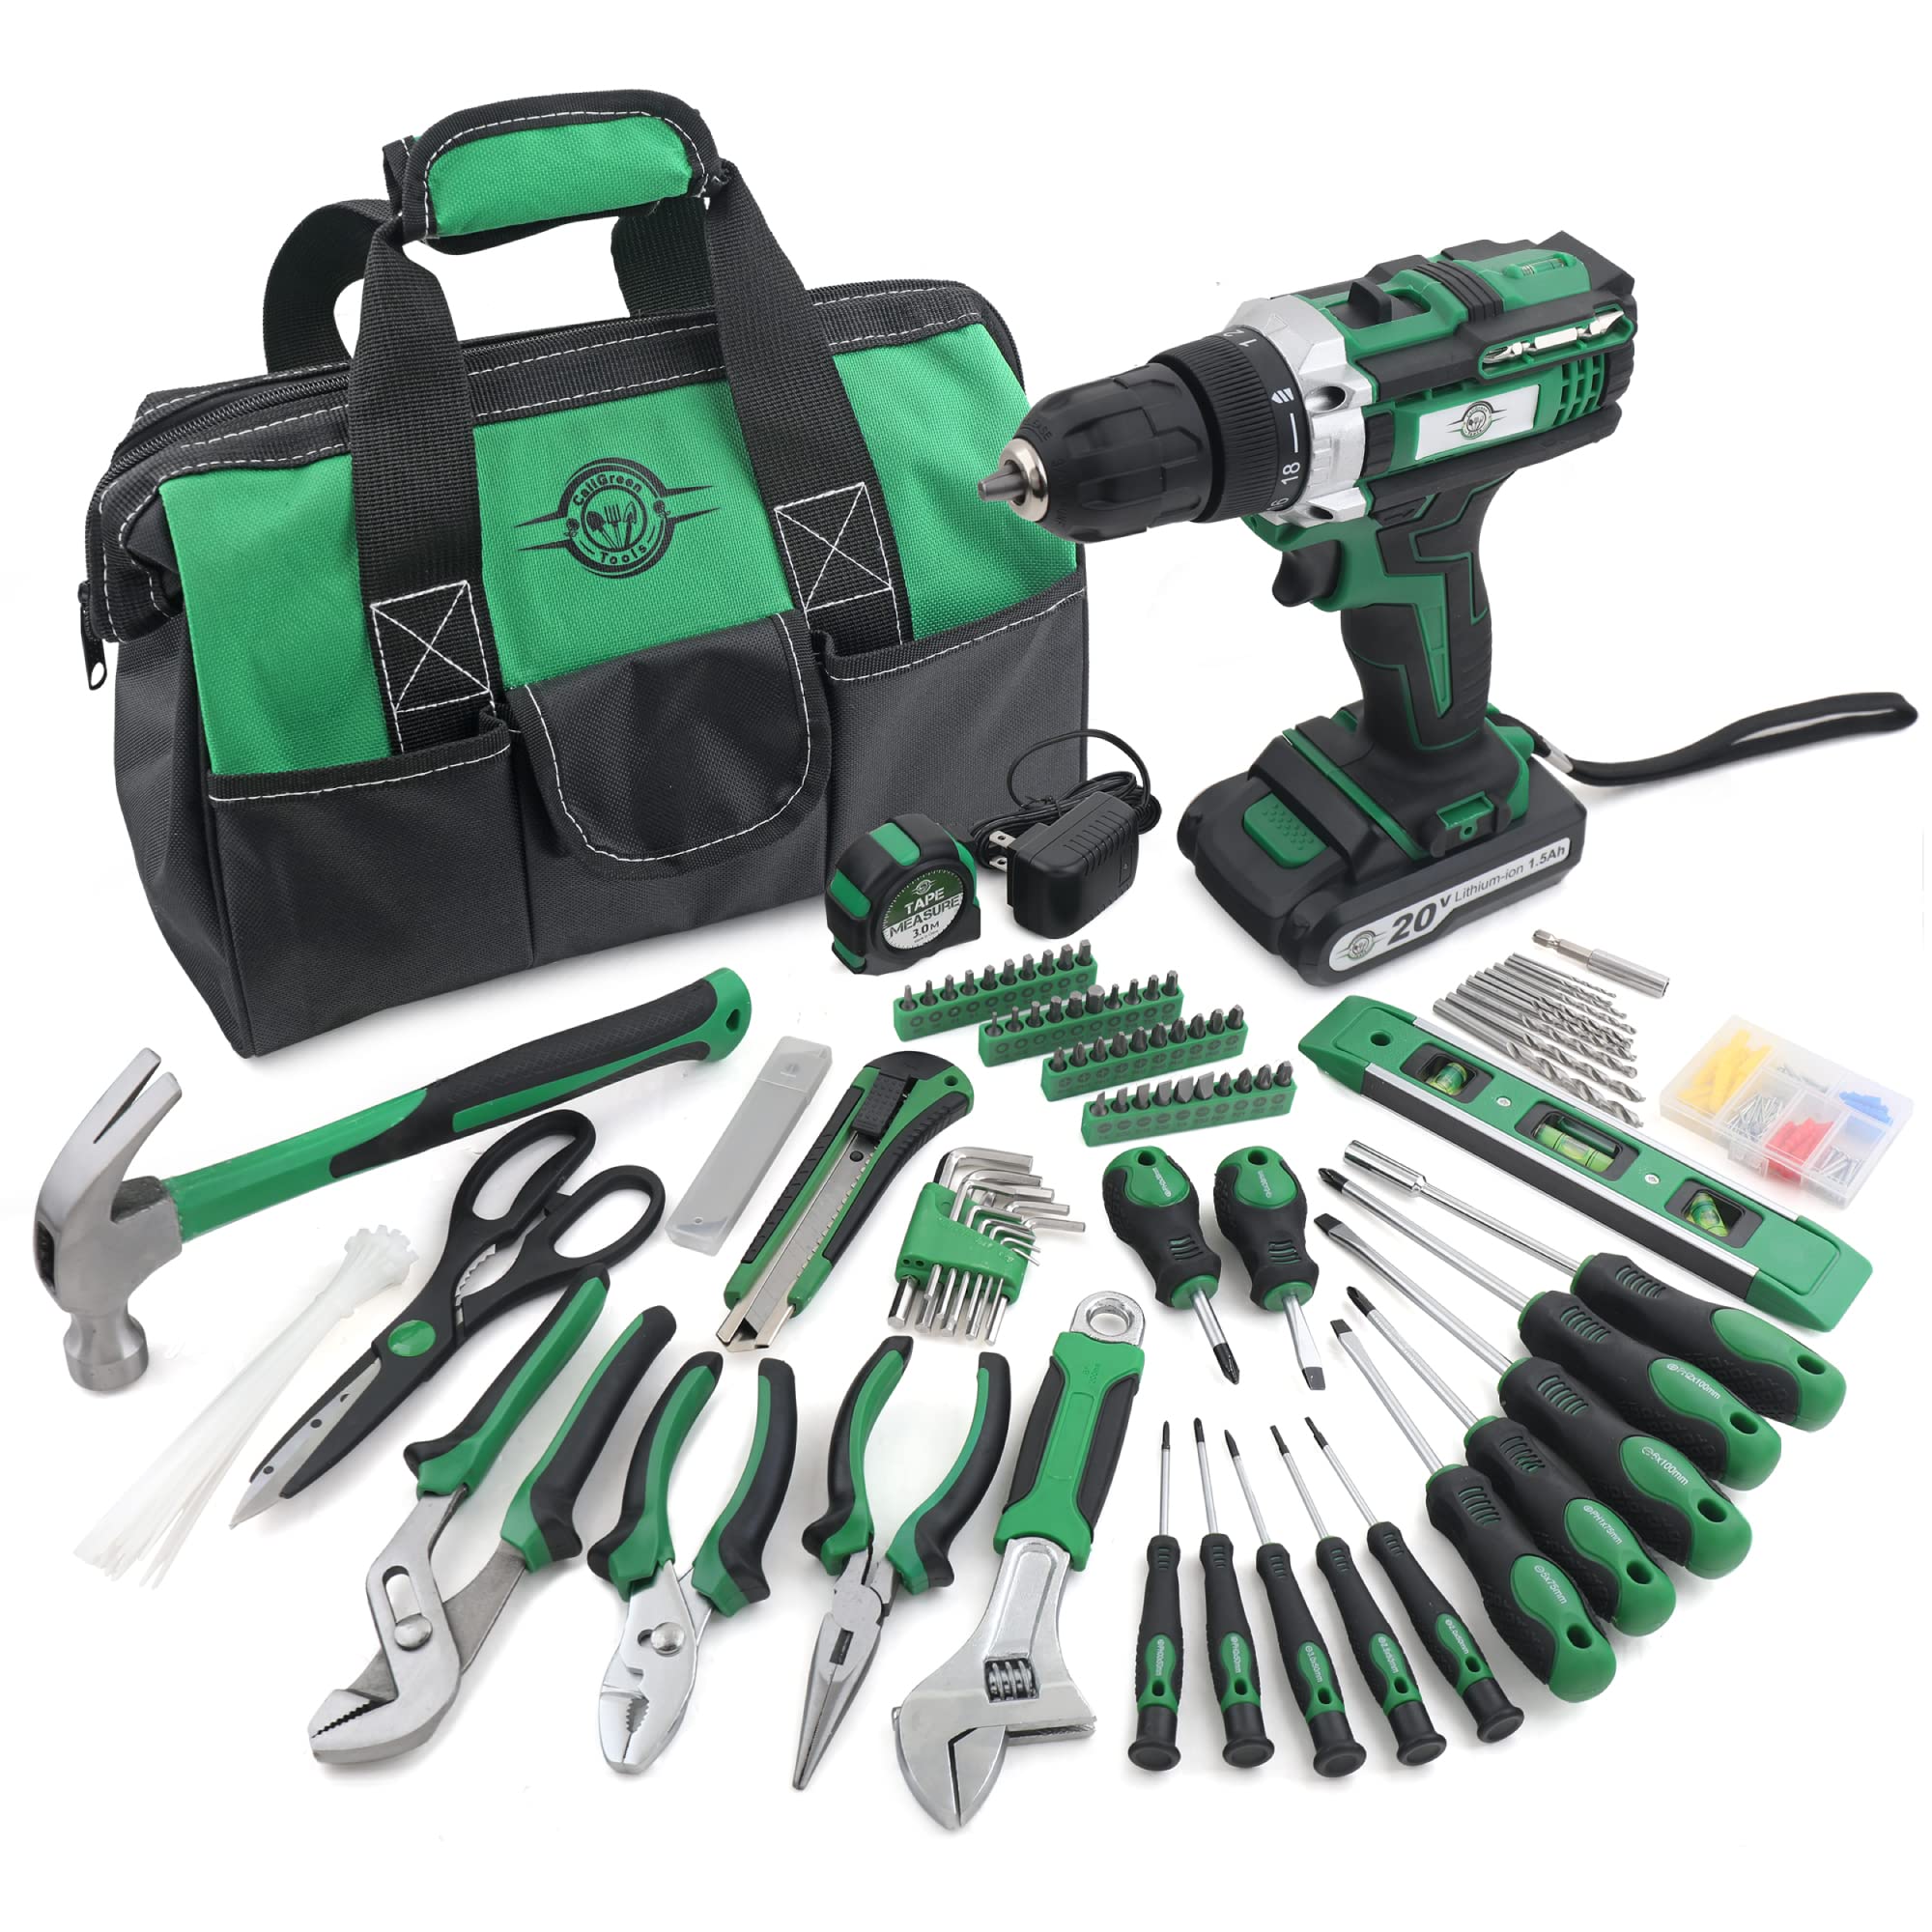 ELEVON 232-Piece 20V Cordless Lithium-ion Drill DriverElectric Power Drill Set with Household Tool Kit12 Inch Wide Mouth Op